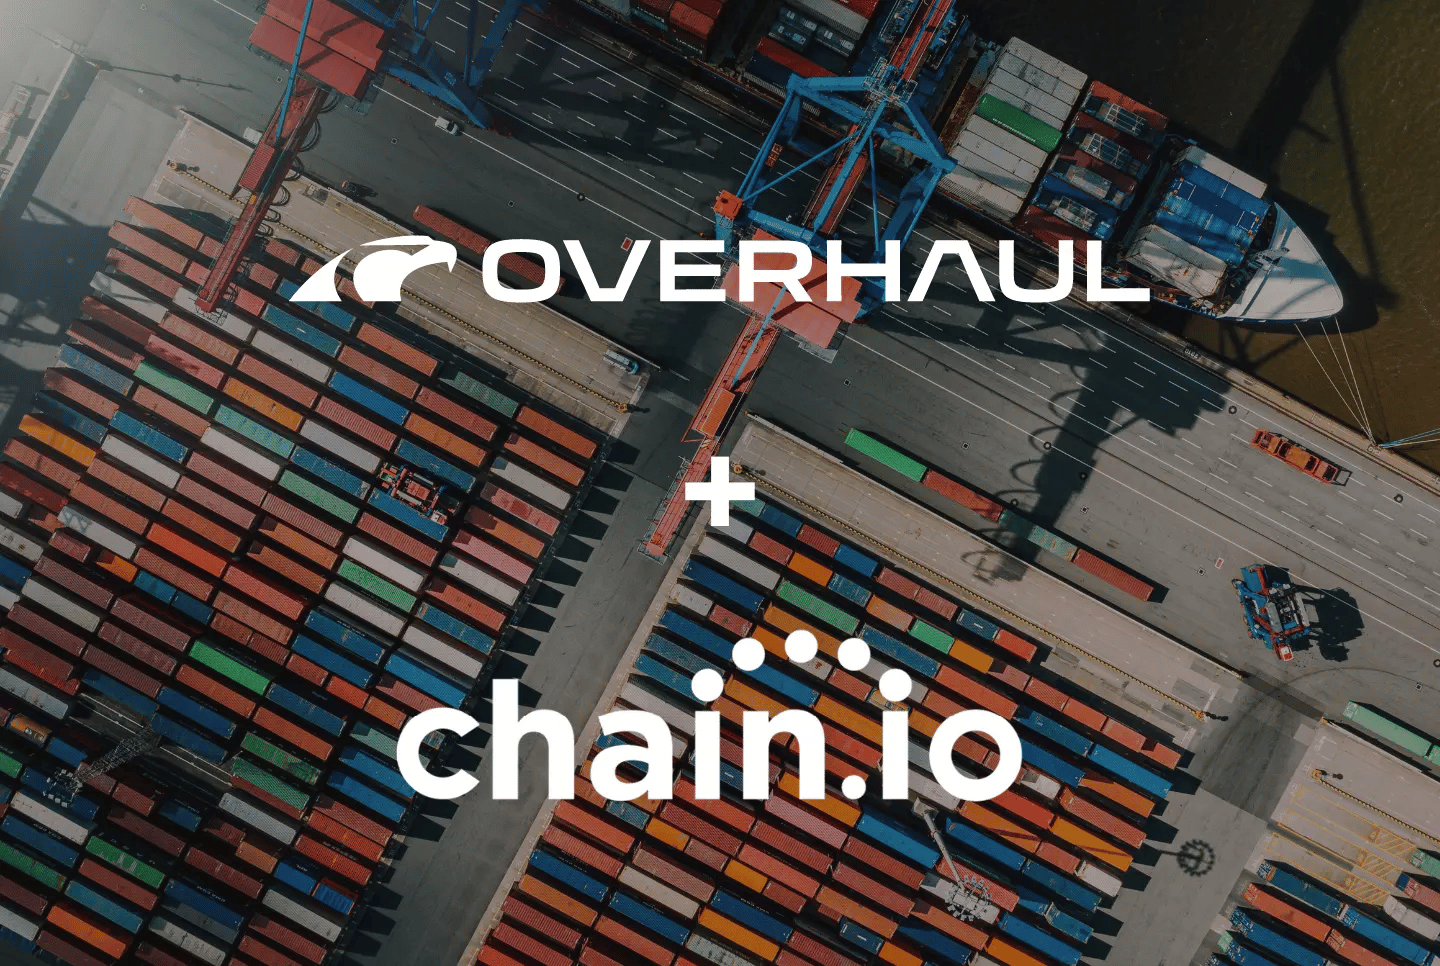 Overhaul and Chain.io bring supply chain visibility and integrations to freight forwarders and shippers